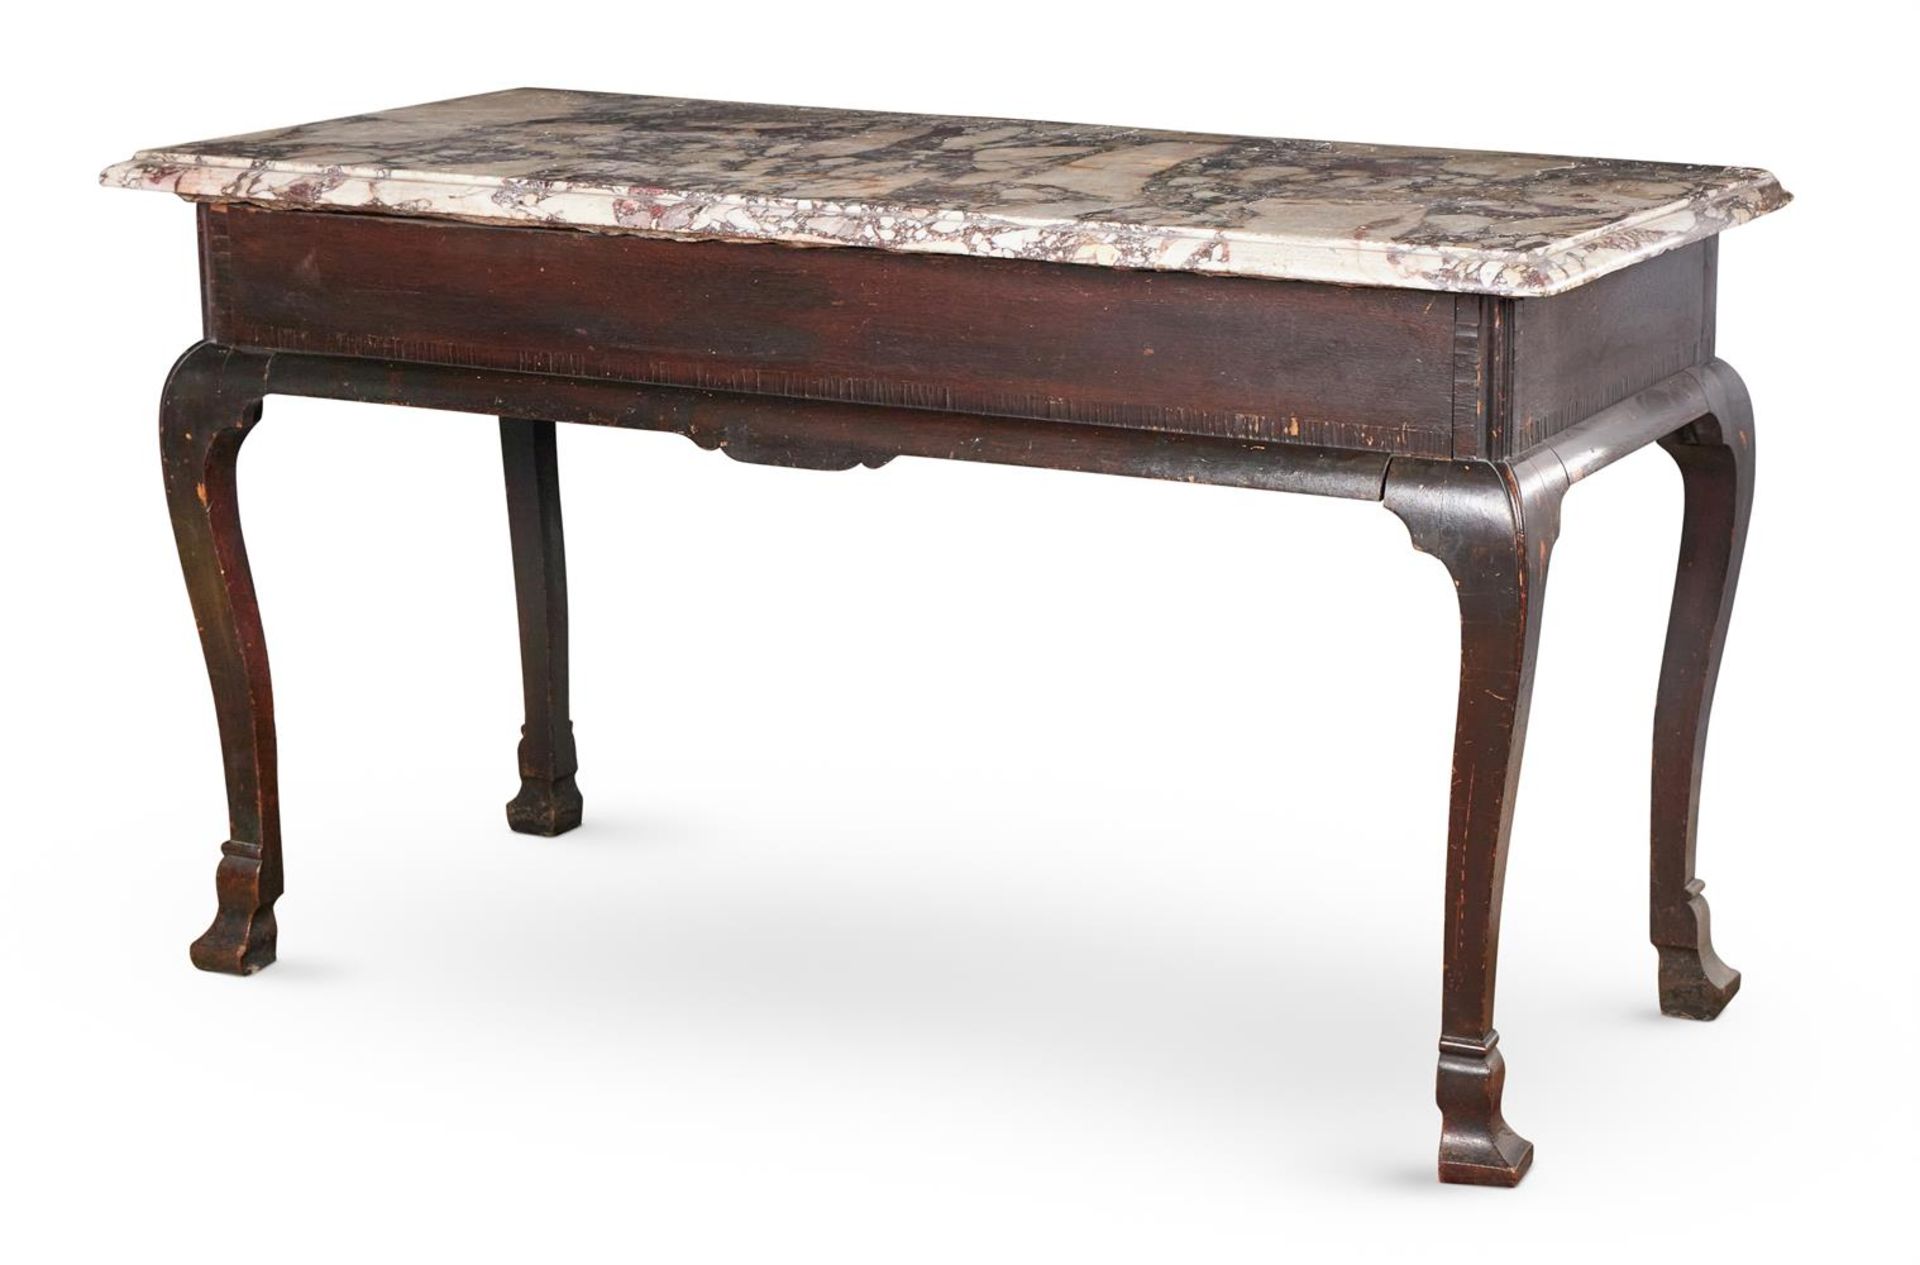 A GEORGE II OAK AND MARBLE TOPPED SIDE TABLE, MID 18TH CENTURY - Image 2 of 2